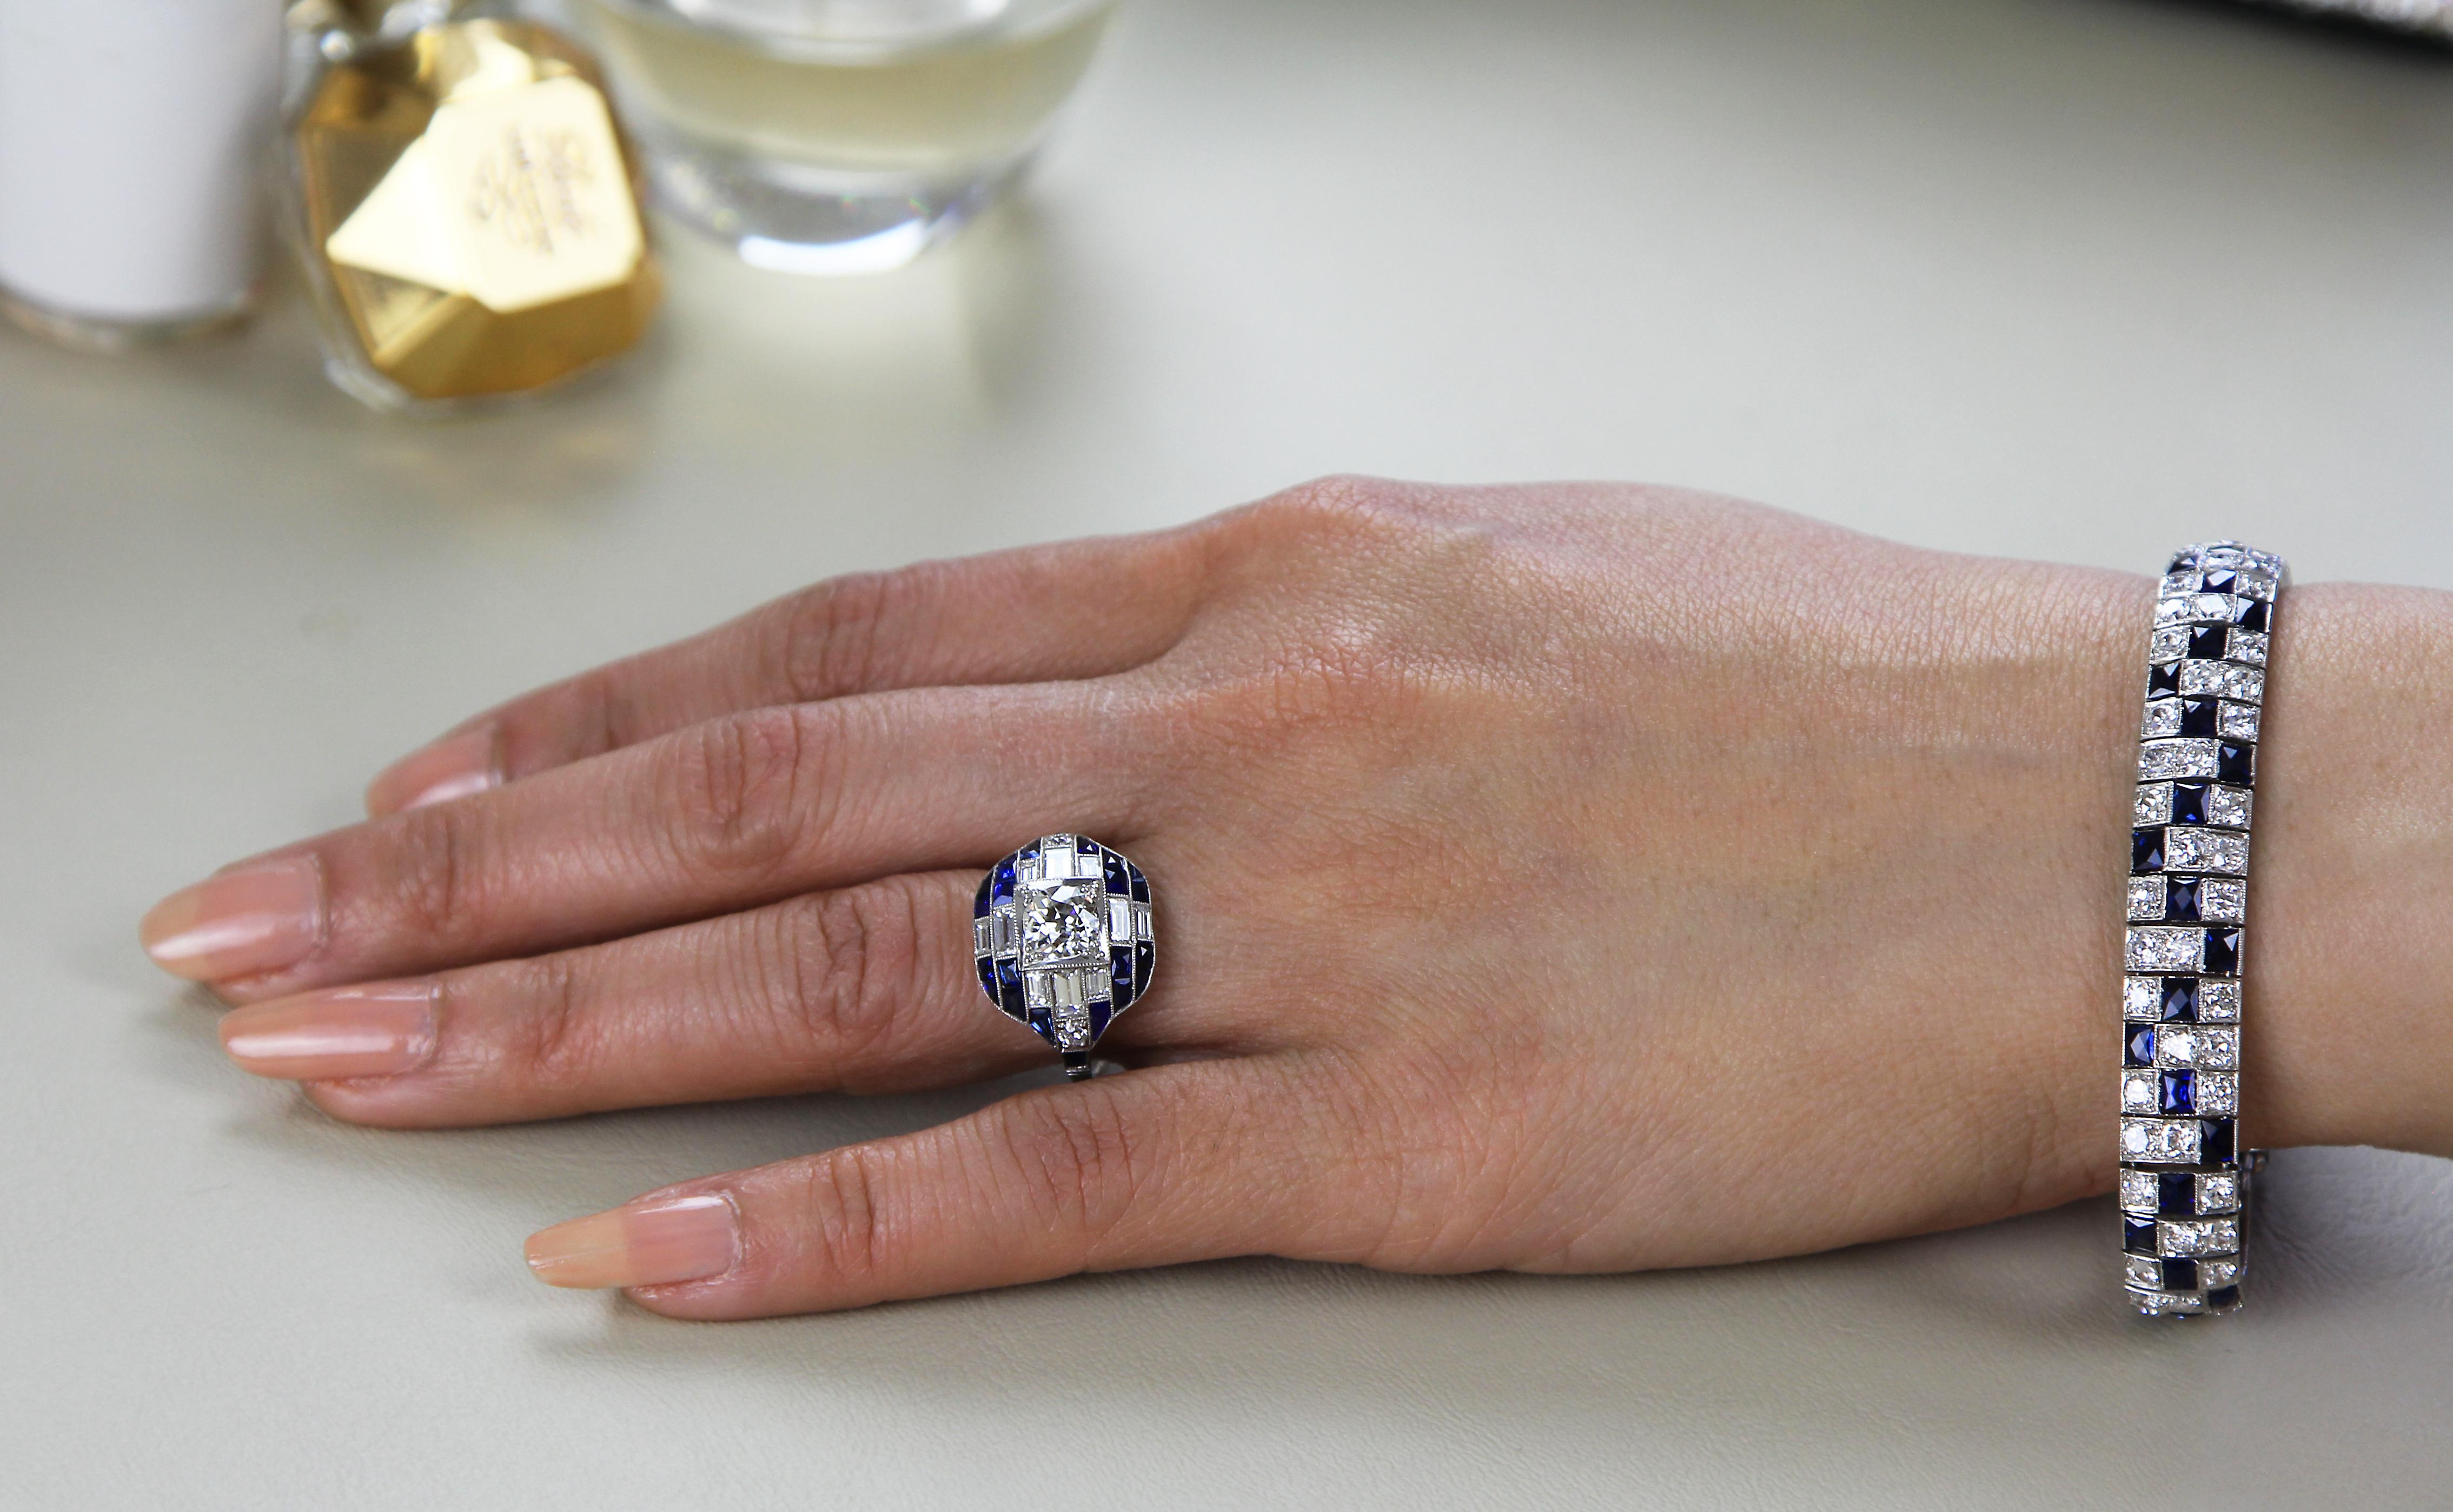 An Art-Deco style, diamond and sapphire cocktail ring set in platinum. The central old-European-cut diamond is surrounded by baguette-cut diamonds and sapphires, circa 1960's. Its detailed design consists of a bold glistening white round brilliant